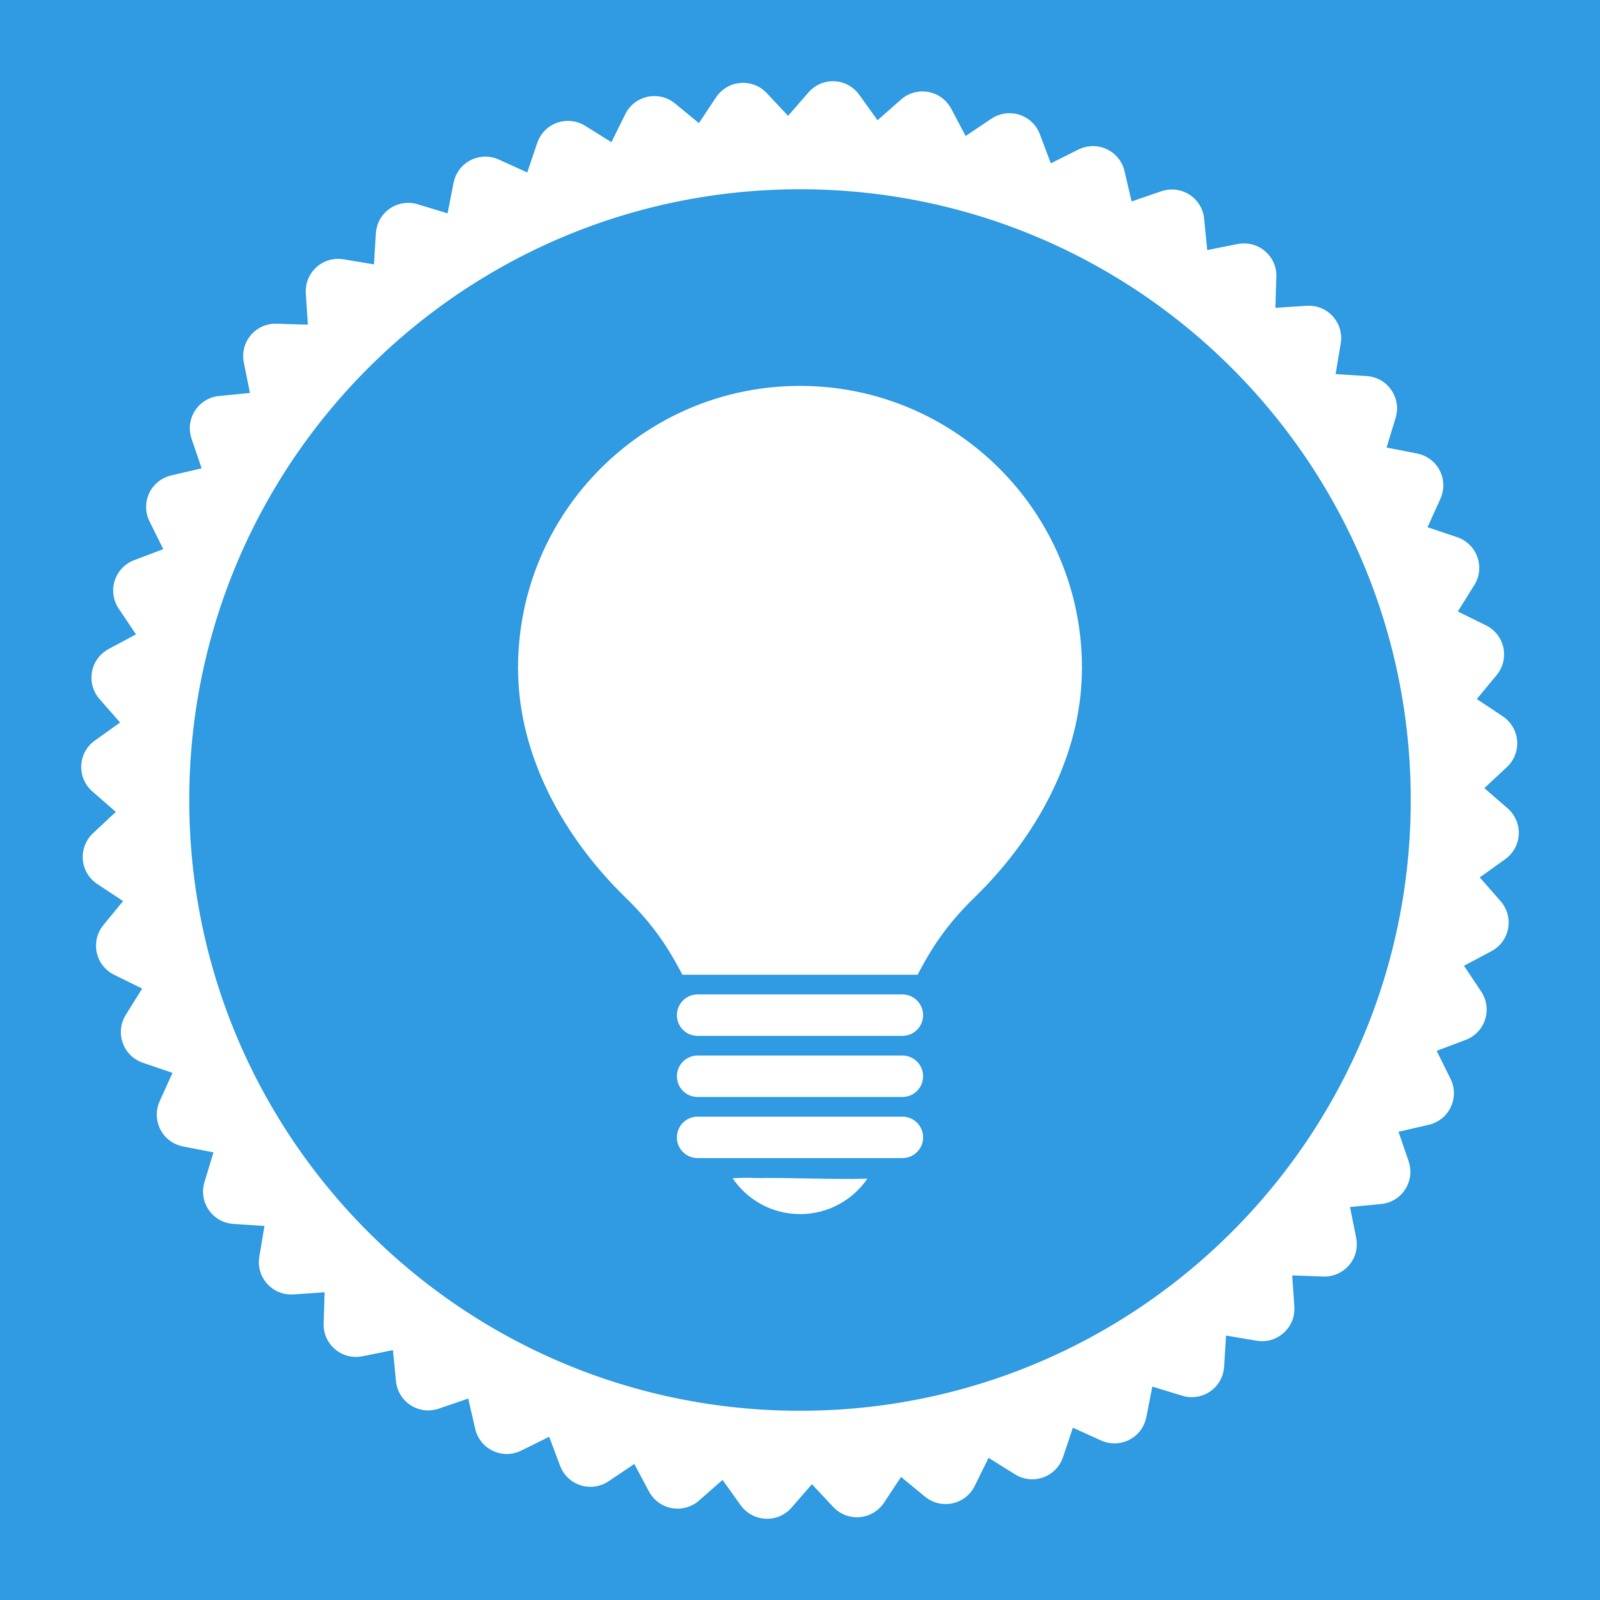 Electric Bulb flat white color round stamp icon by ahasoft